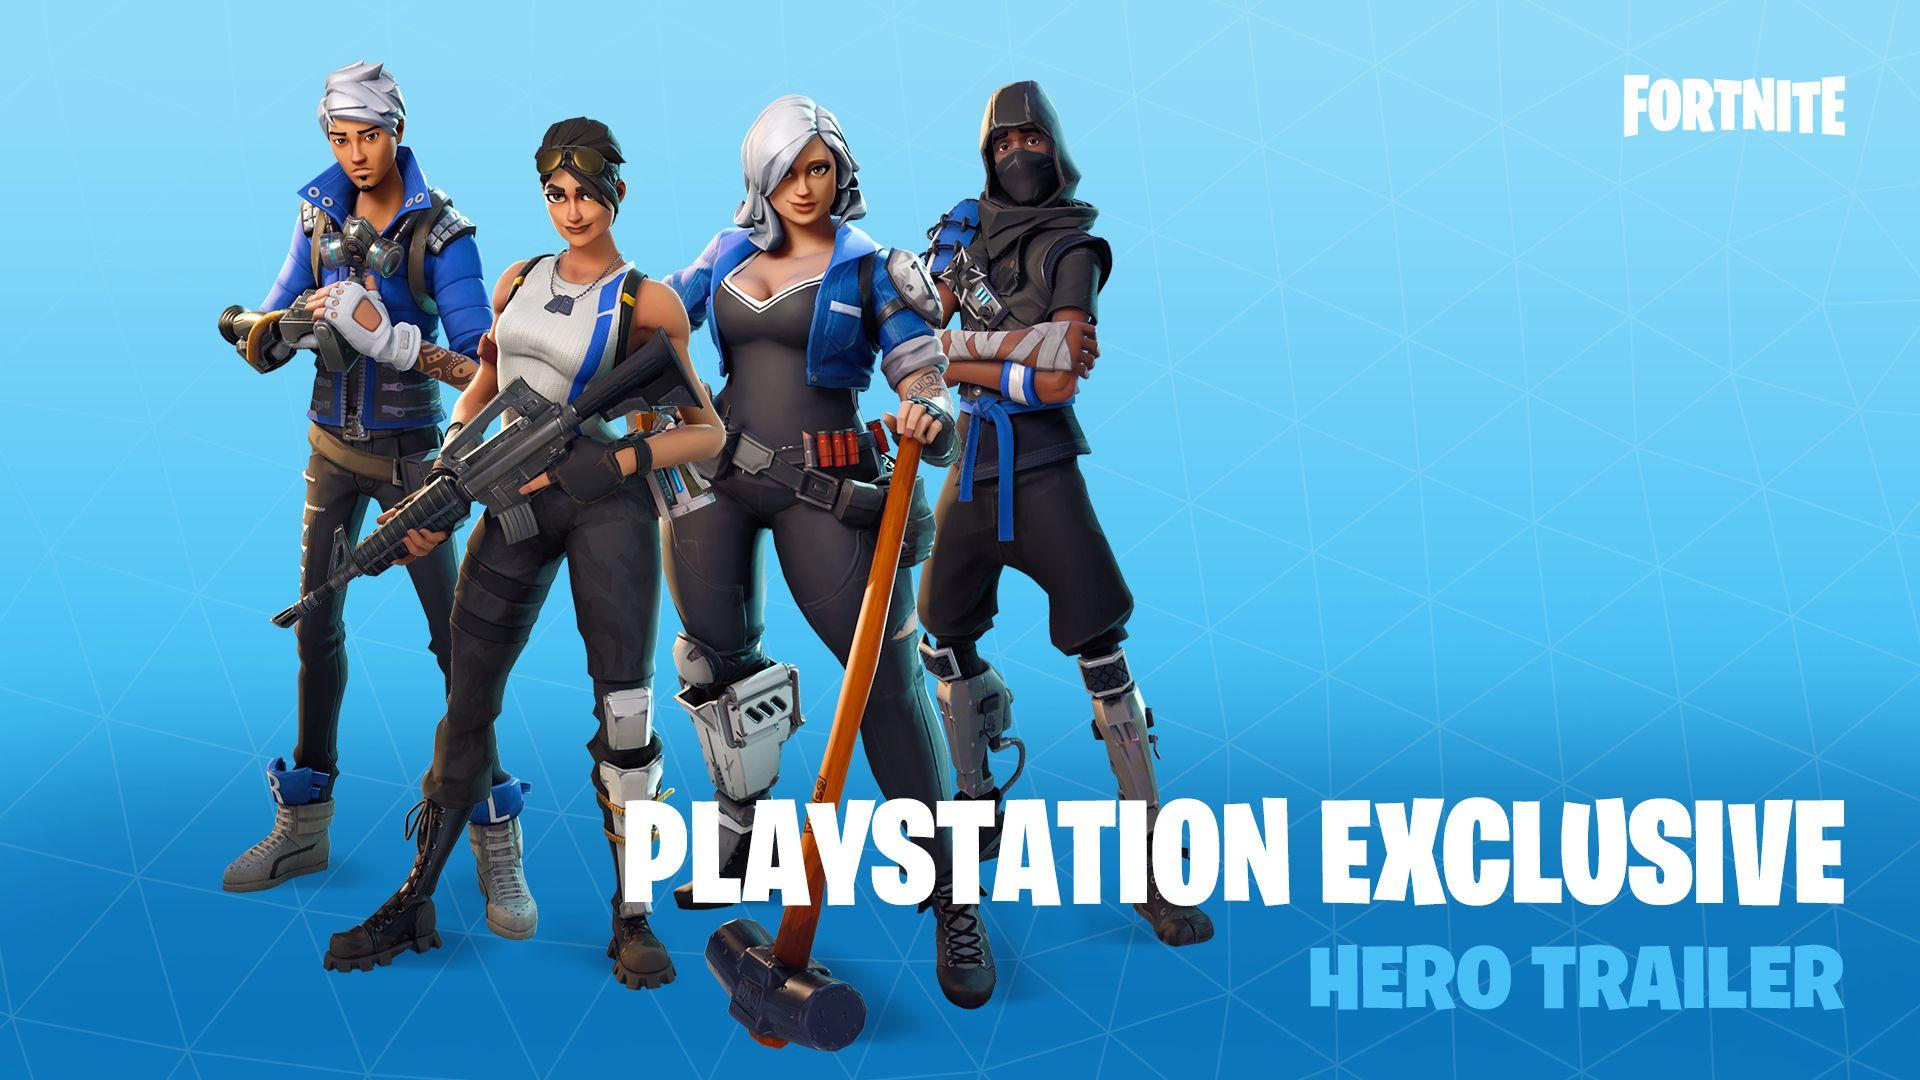 Fortnite Is Here With Exclusive PS4 Heroes #Playstation4 #PS4 #Sony